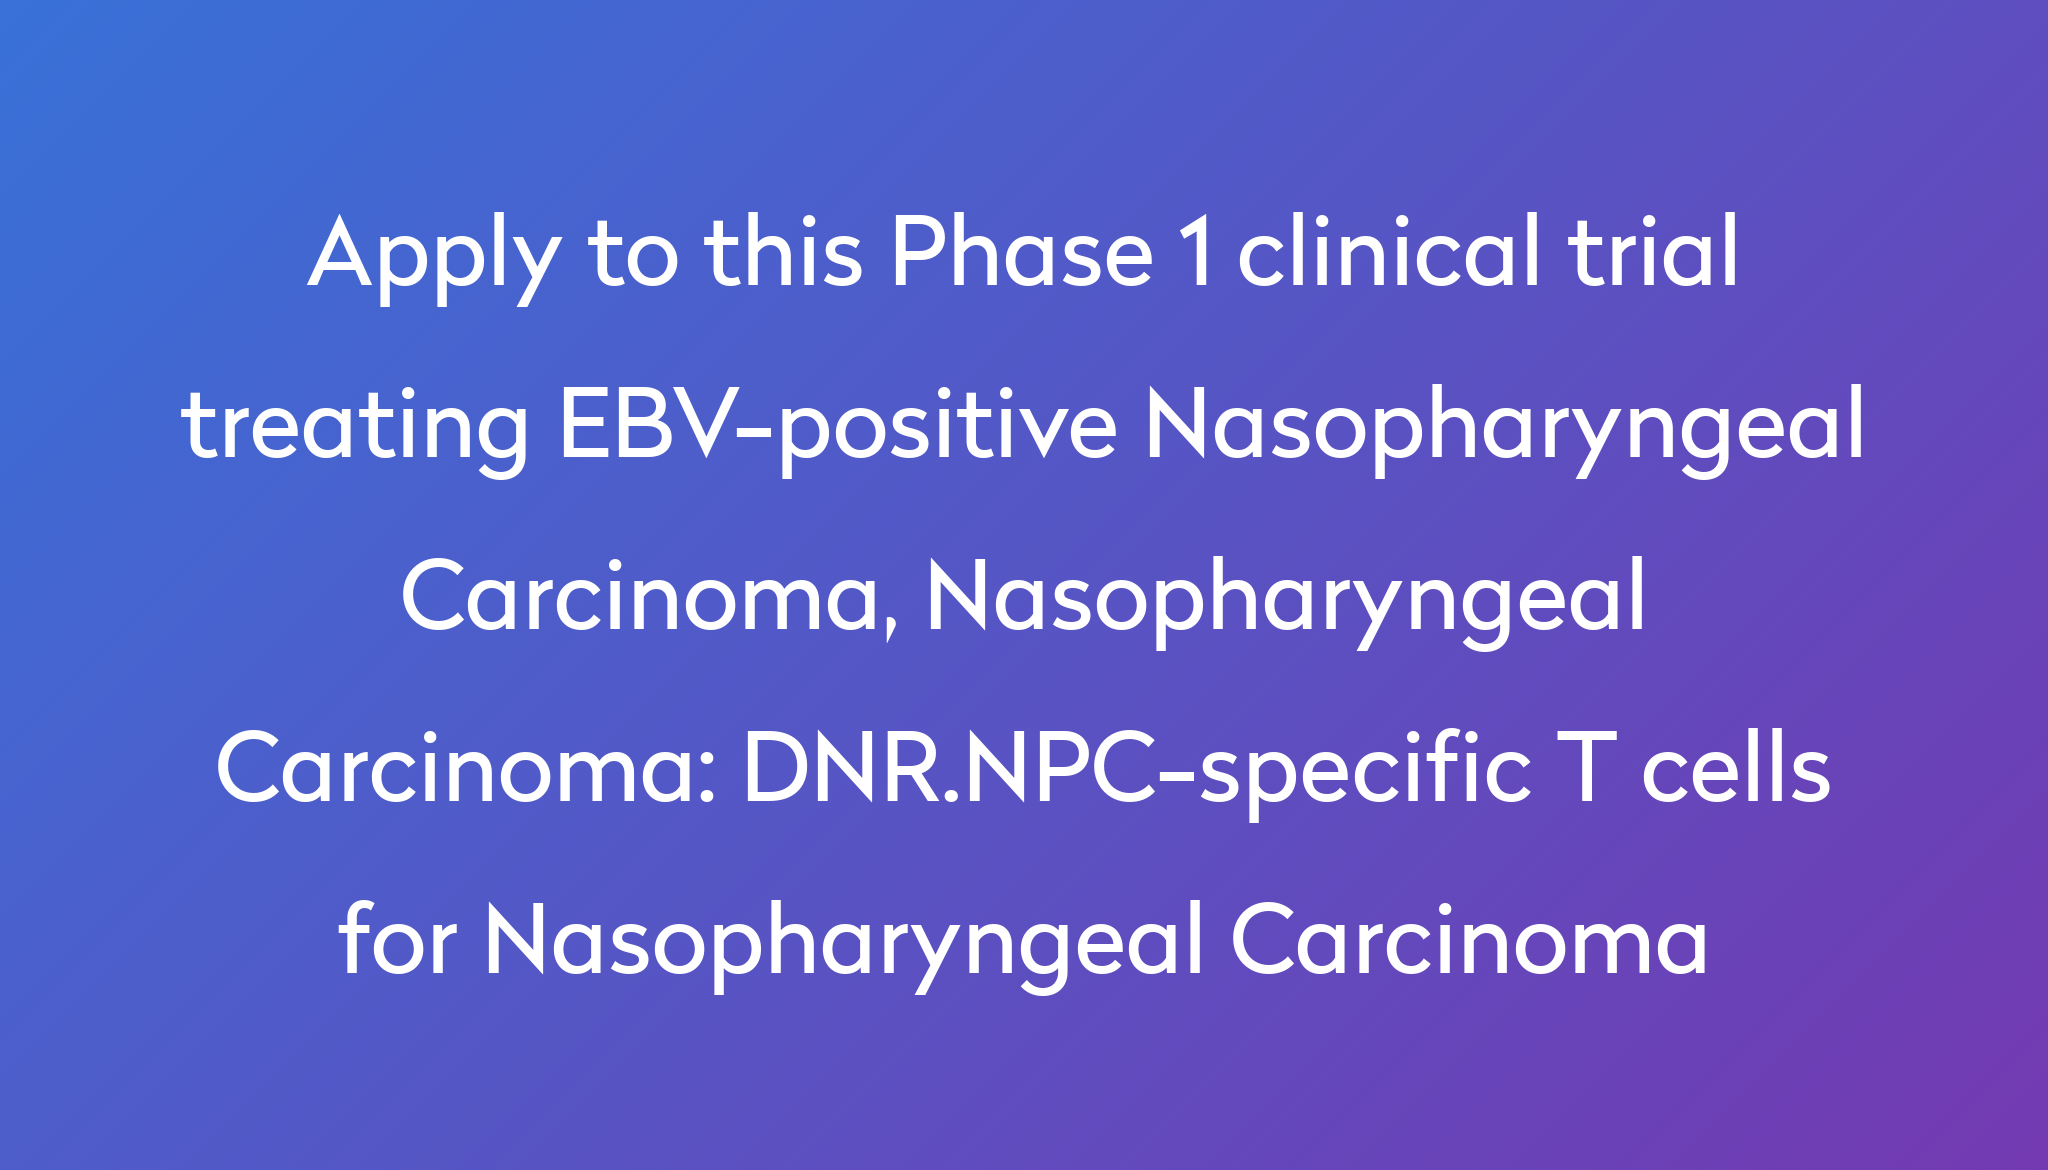 dnr-npc-specific-t-cells-for-nasopharyngeal-carcinoma-clinical-trial-2023-power